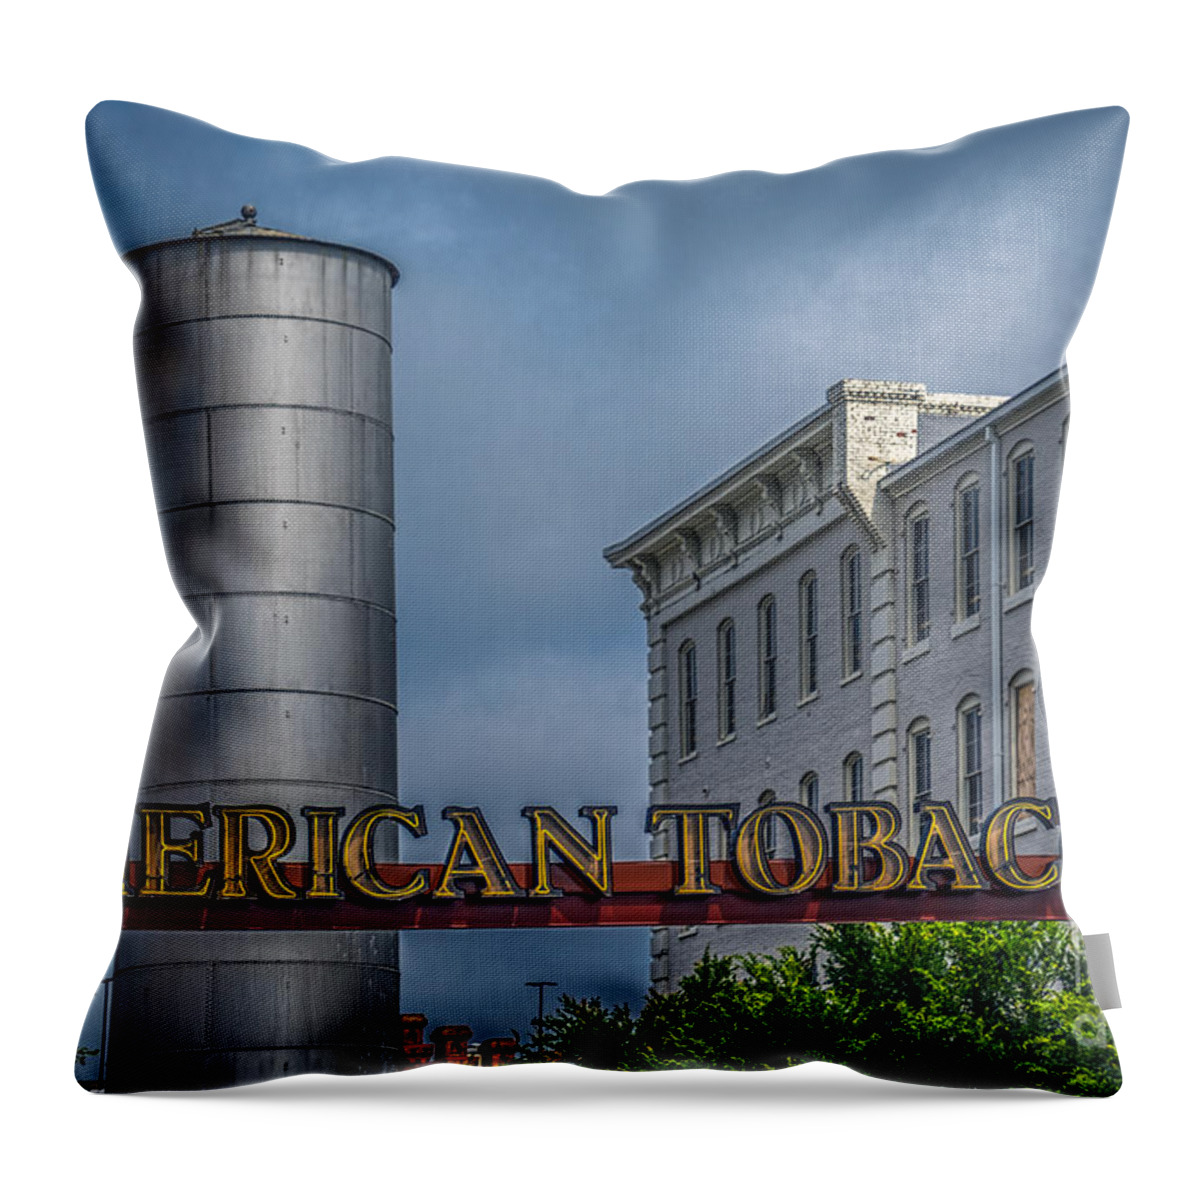 American Tobacco Campus Throw Pillow featuring the photograph American Tobacco Redevelopment by Izet Kapetanovic